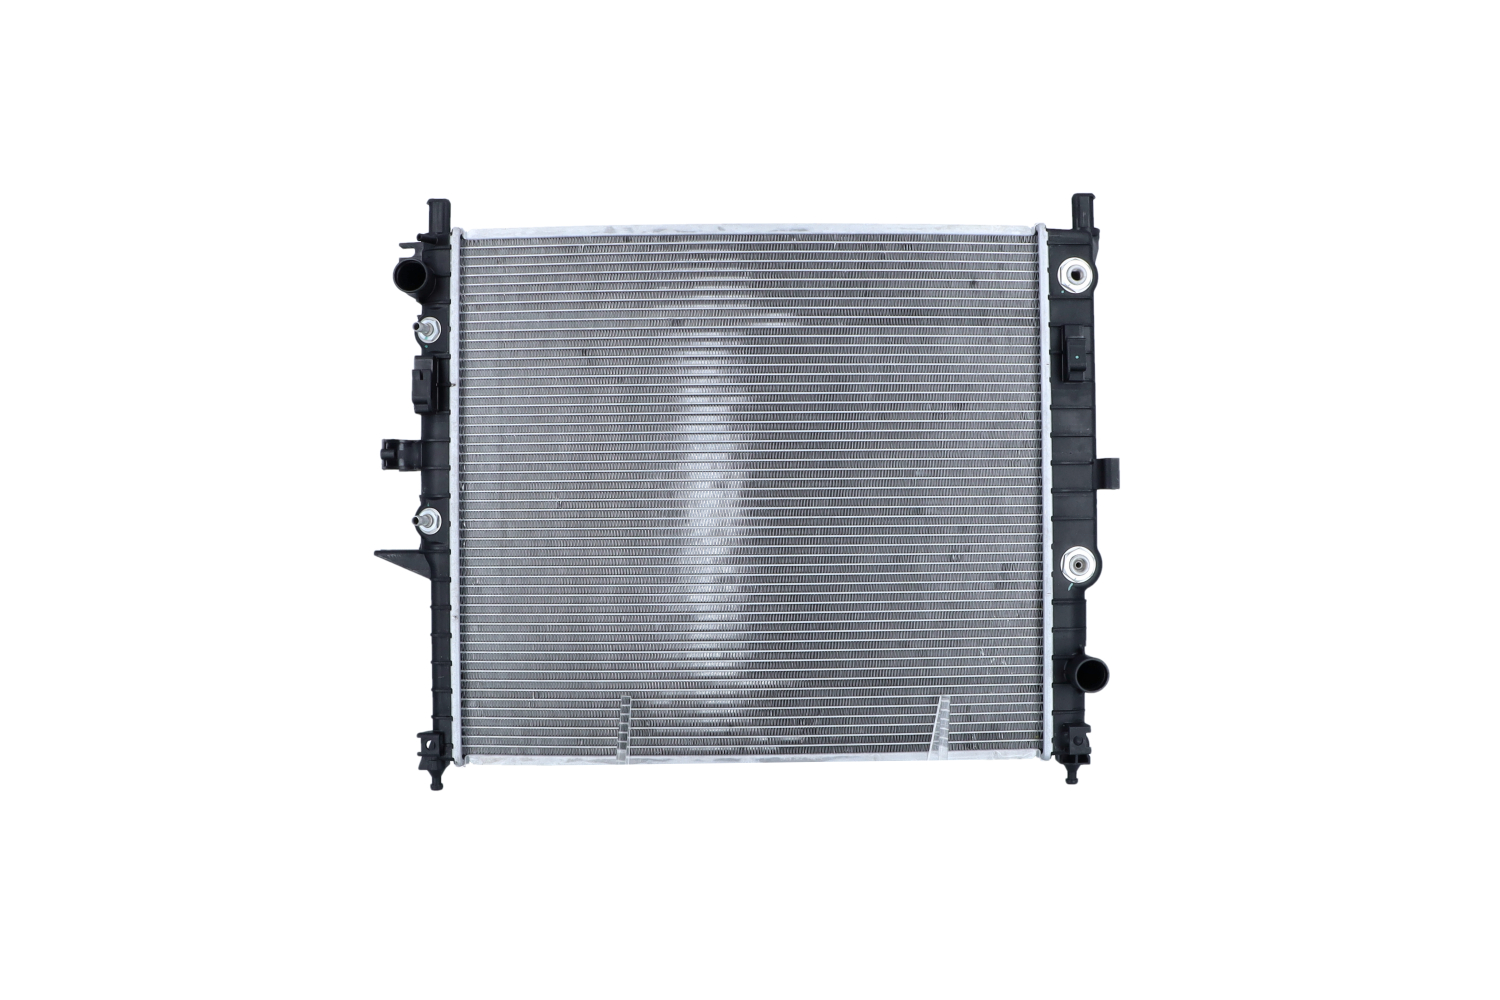 NRF 55334 Engine radiator Aluminium, 610 x 545 x 34 mm, with mounting parts, Brazed cooling fins